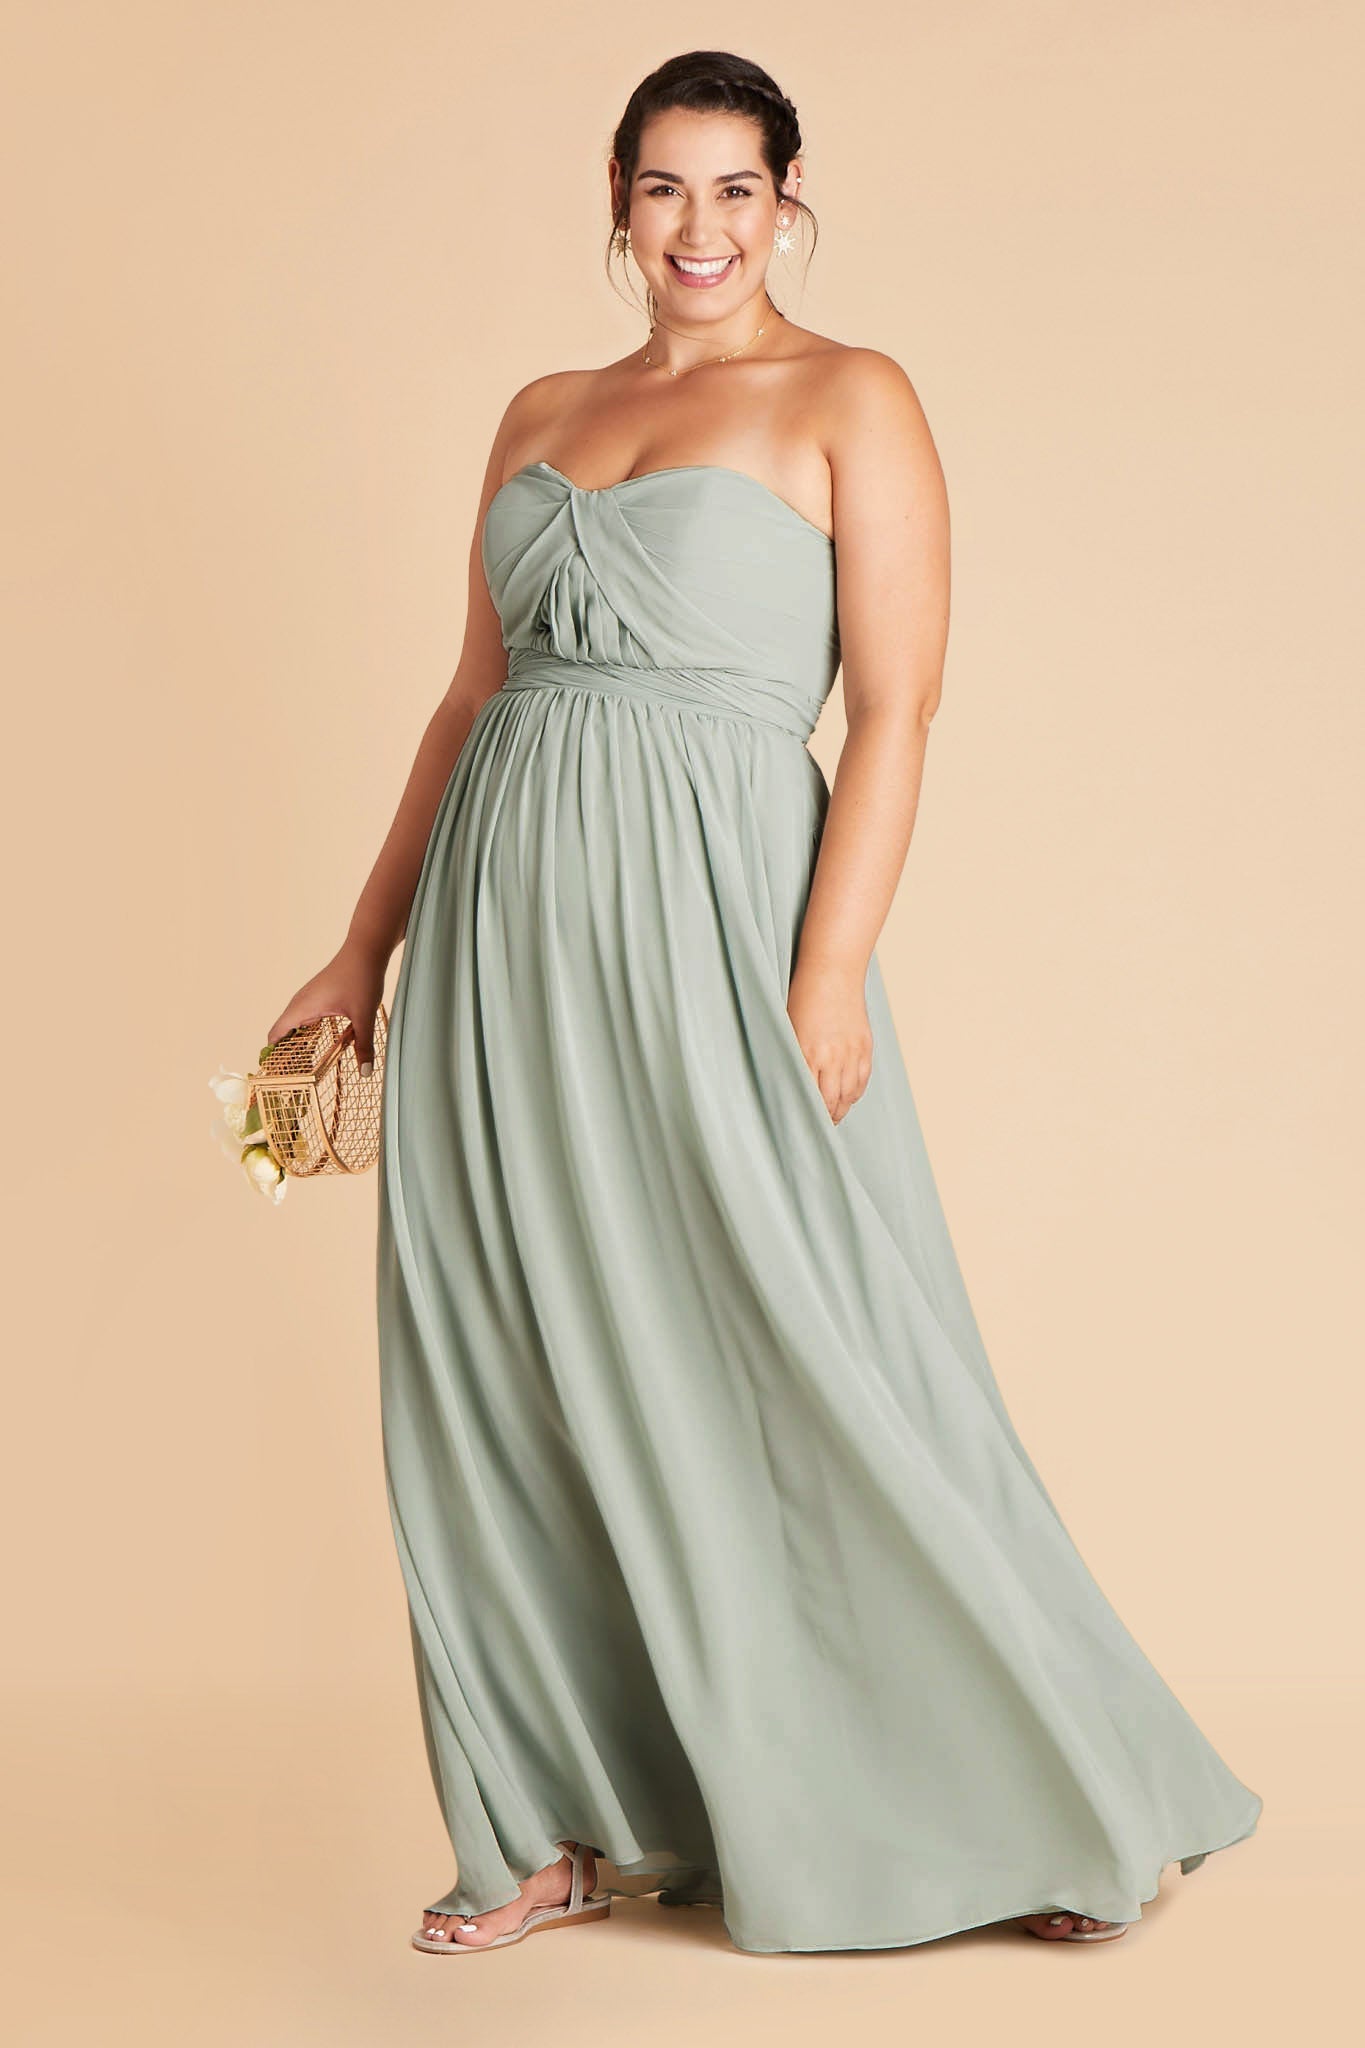 Front view of the floor-length Grace Convertible Plus Size Dress in sage chiffon features a fitted bust and waist with a flowing skirt that moves gracefully as the model steps forward.